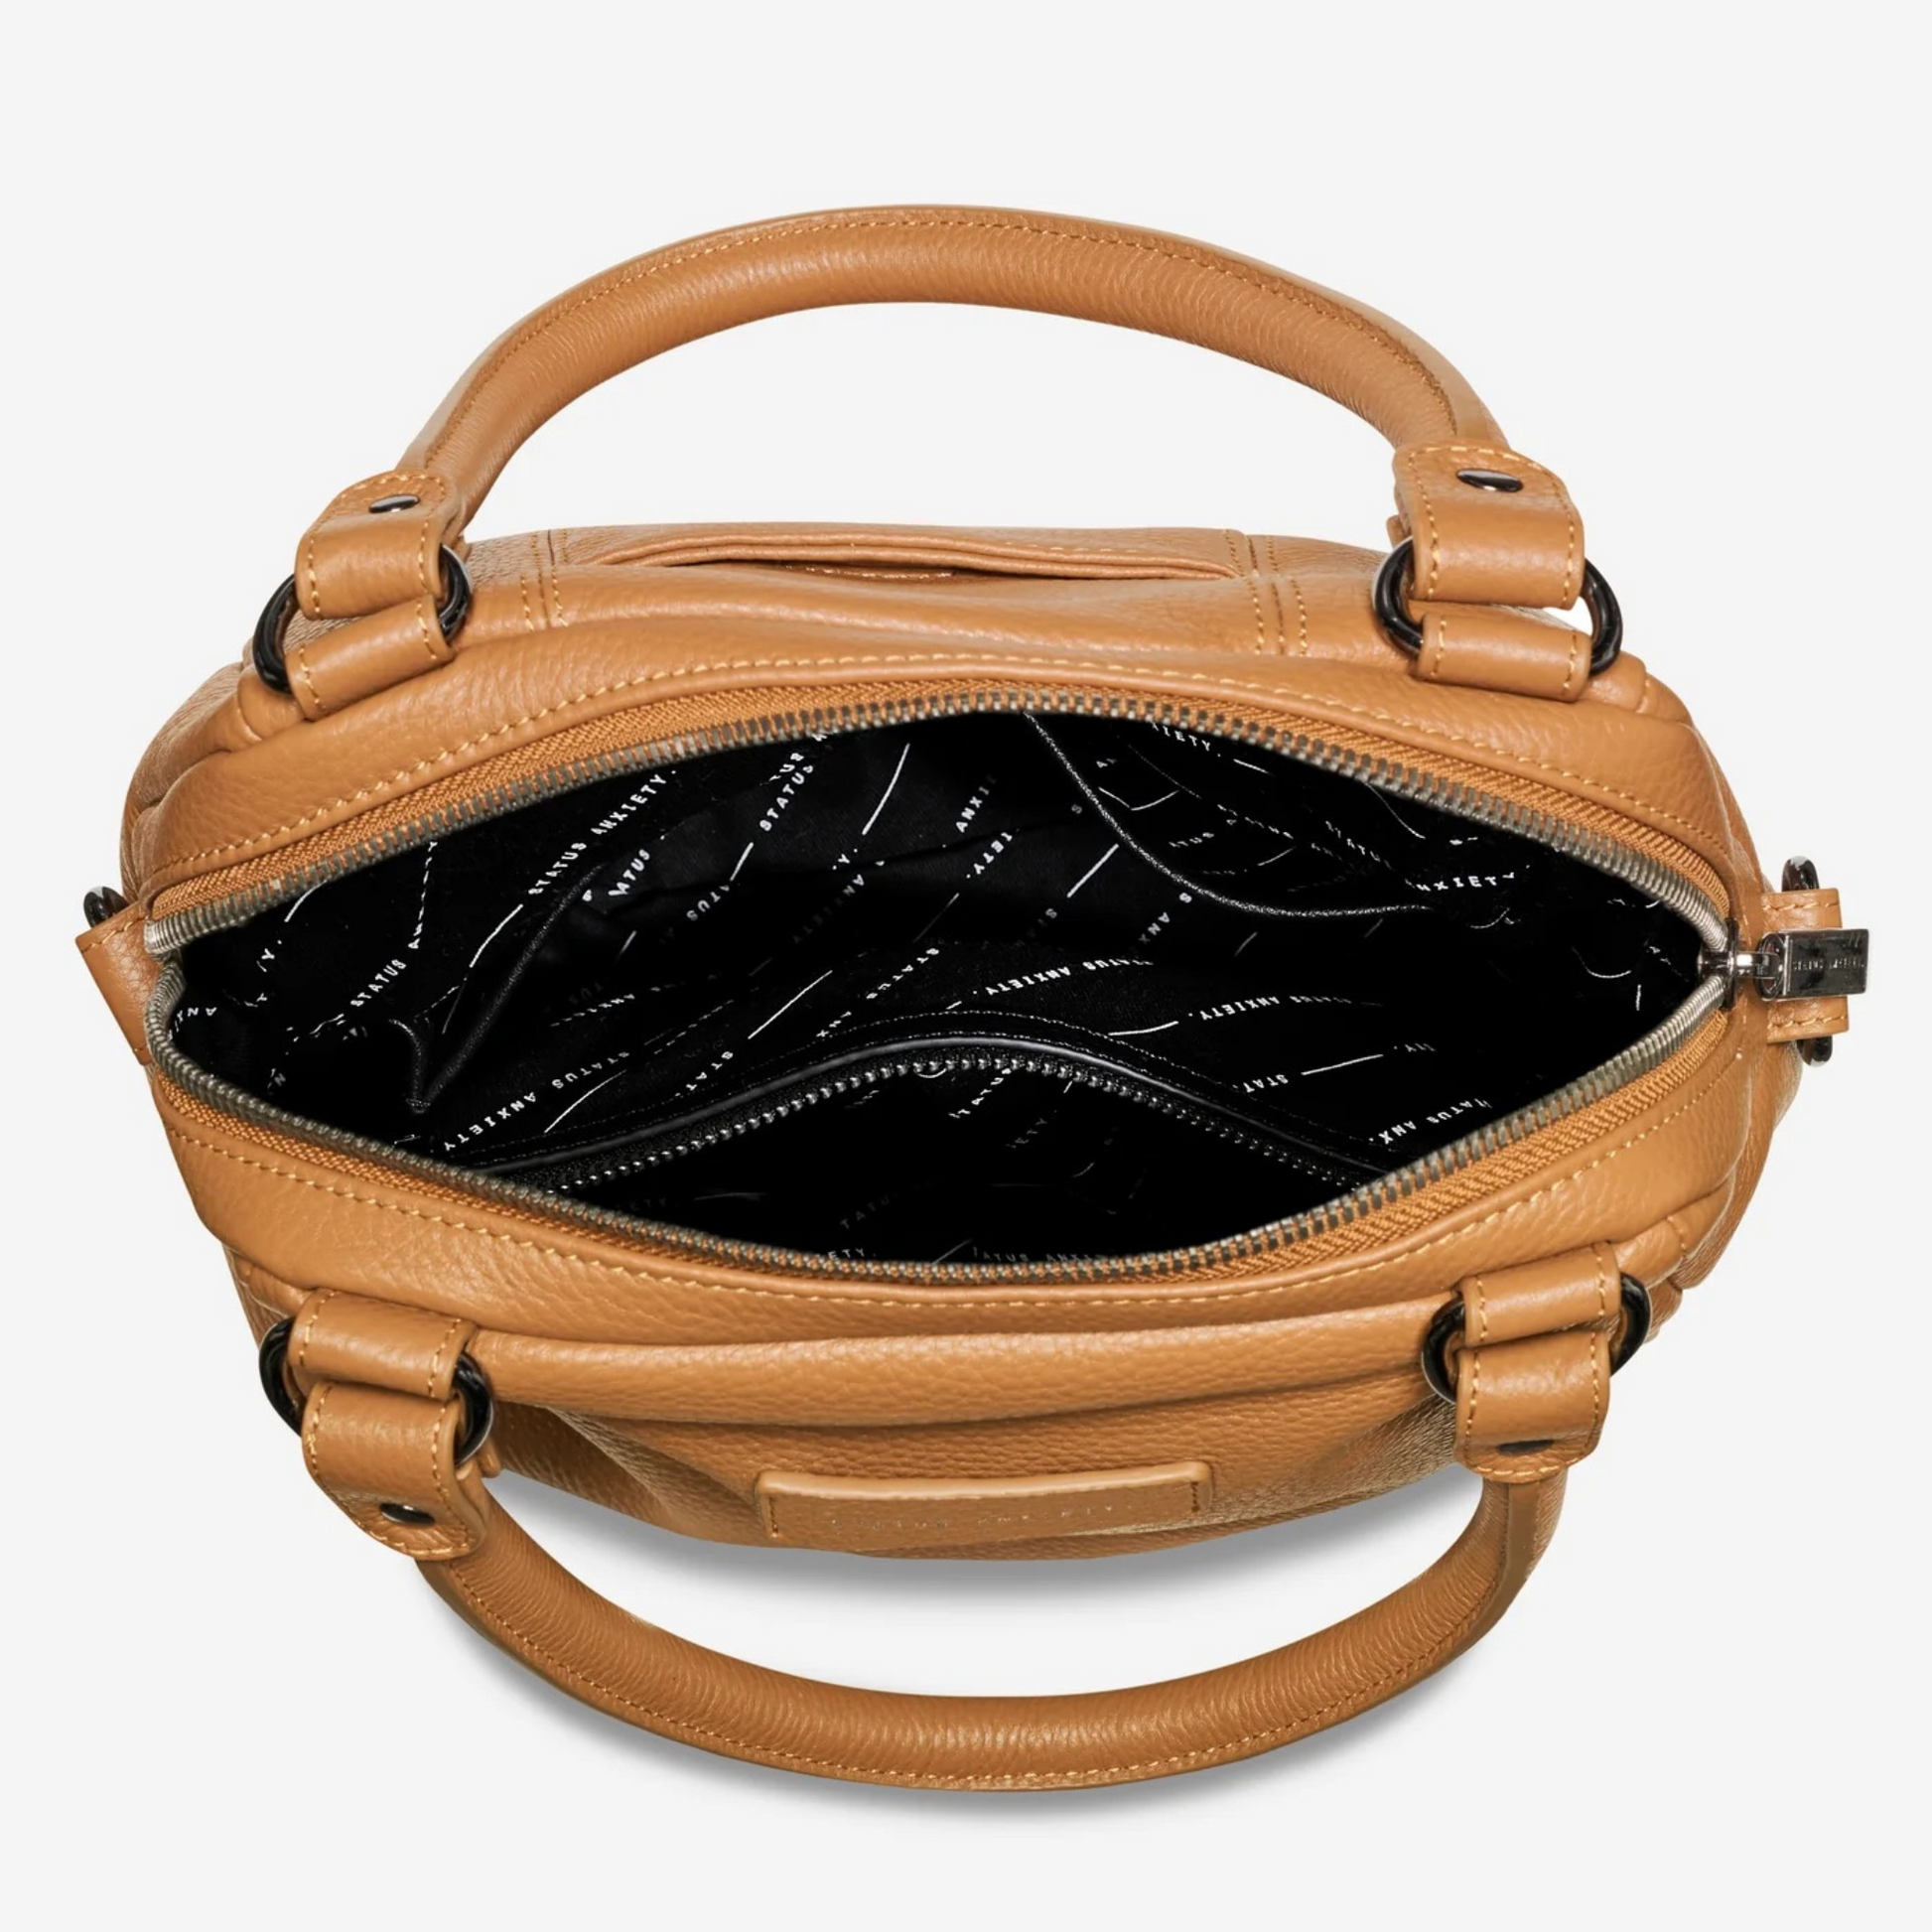 Status Anxiety, the Last Mountains handbag with its taller silhouette is the perfect day to night companion and can be worn over elbow, shoulder or body (with long strap).